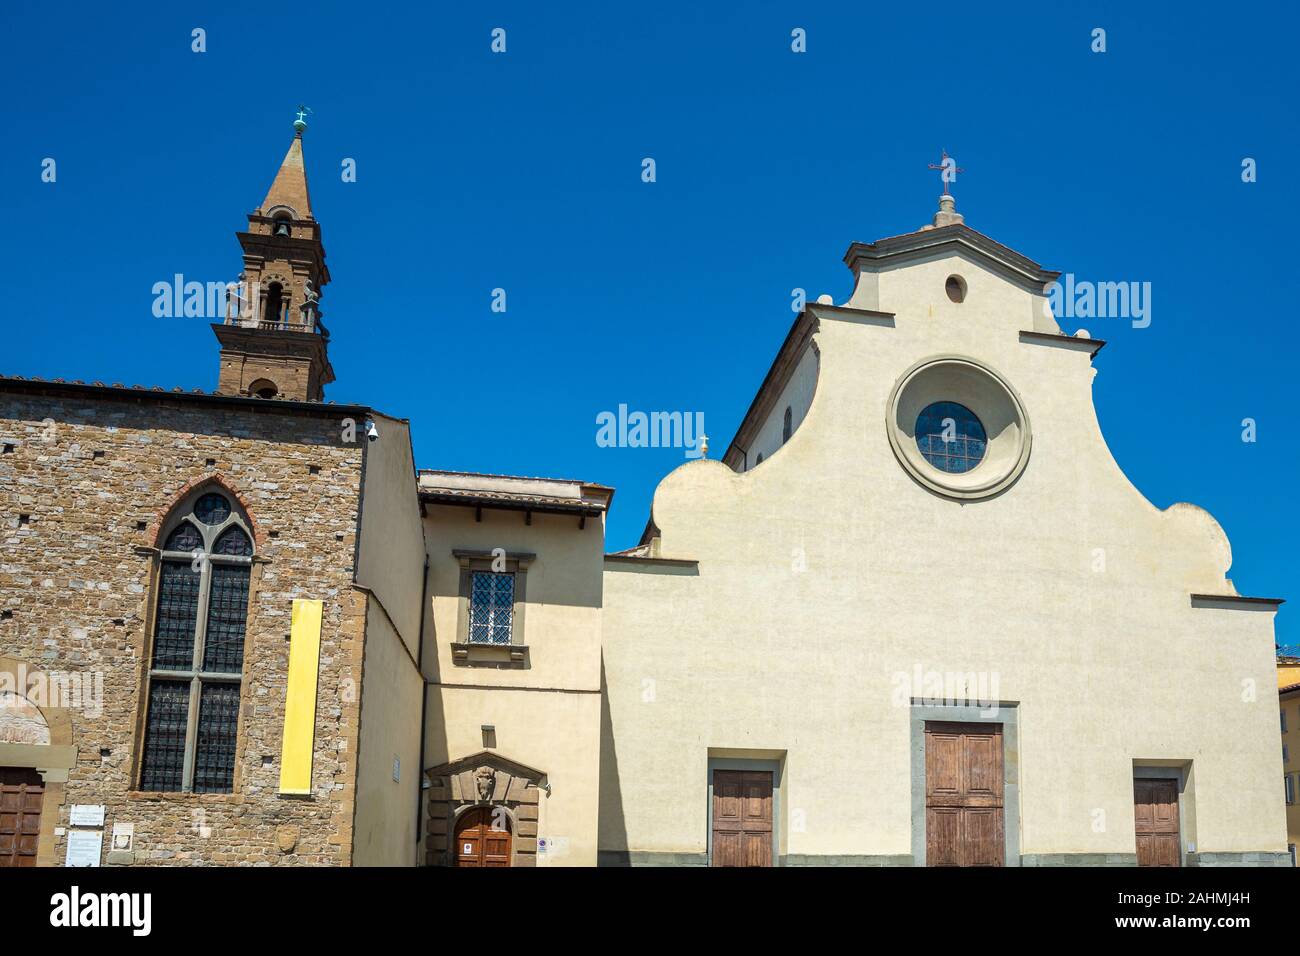 Florence, Italy - June 5, 2019 : The Basilica di Santo Spirito (Basilica of the Holy Spirit) is a church facing the square with the same name. The int Stock Photo